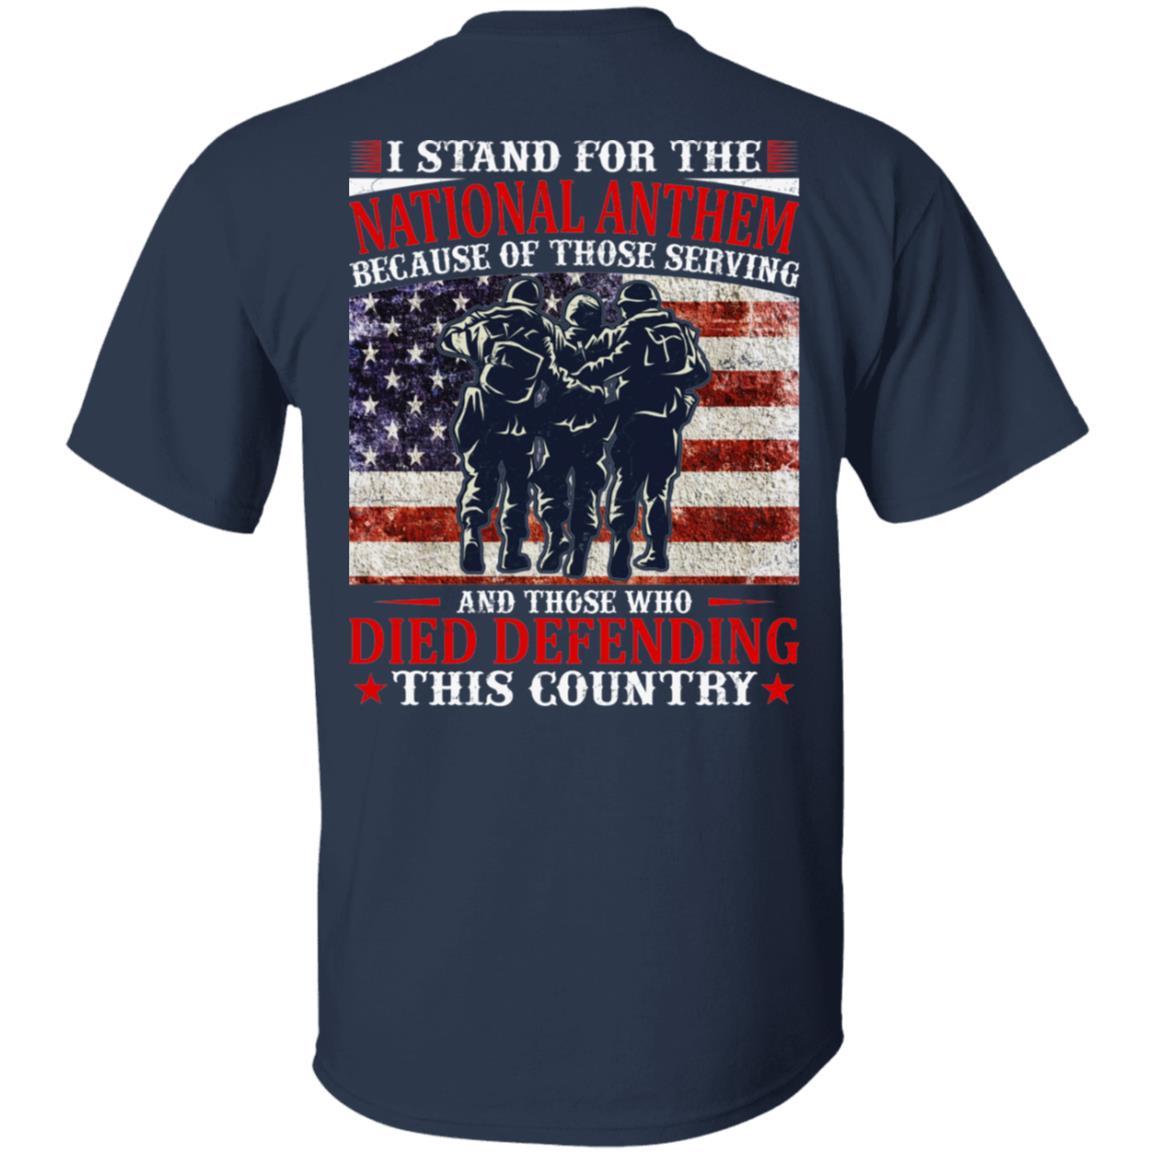 I Stand For The National Anthem Because of Those Serving and Those Who Died Defending This Country Shirt